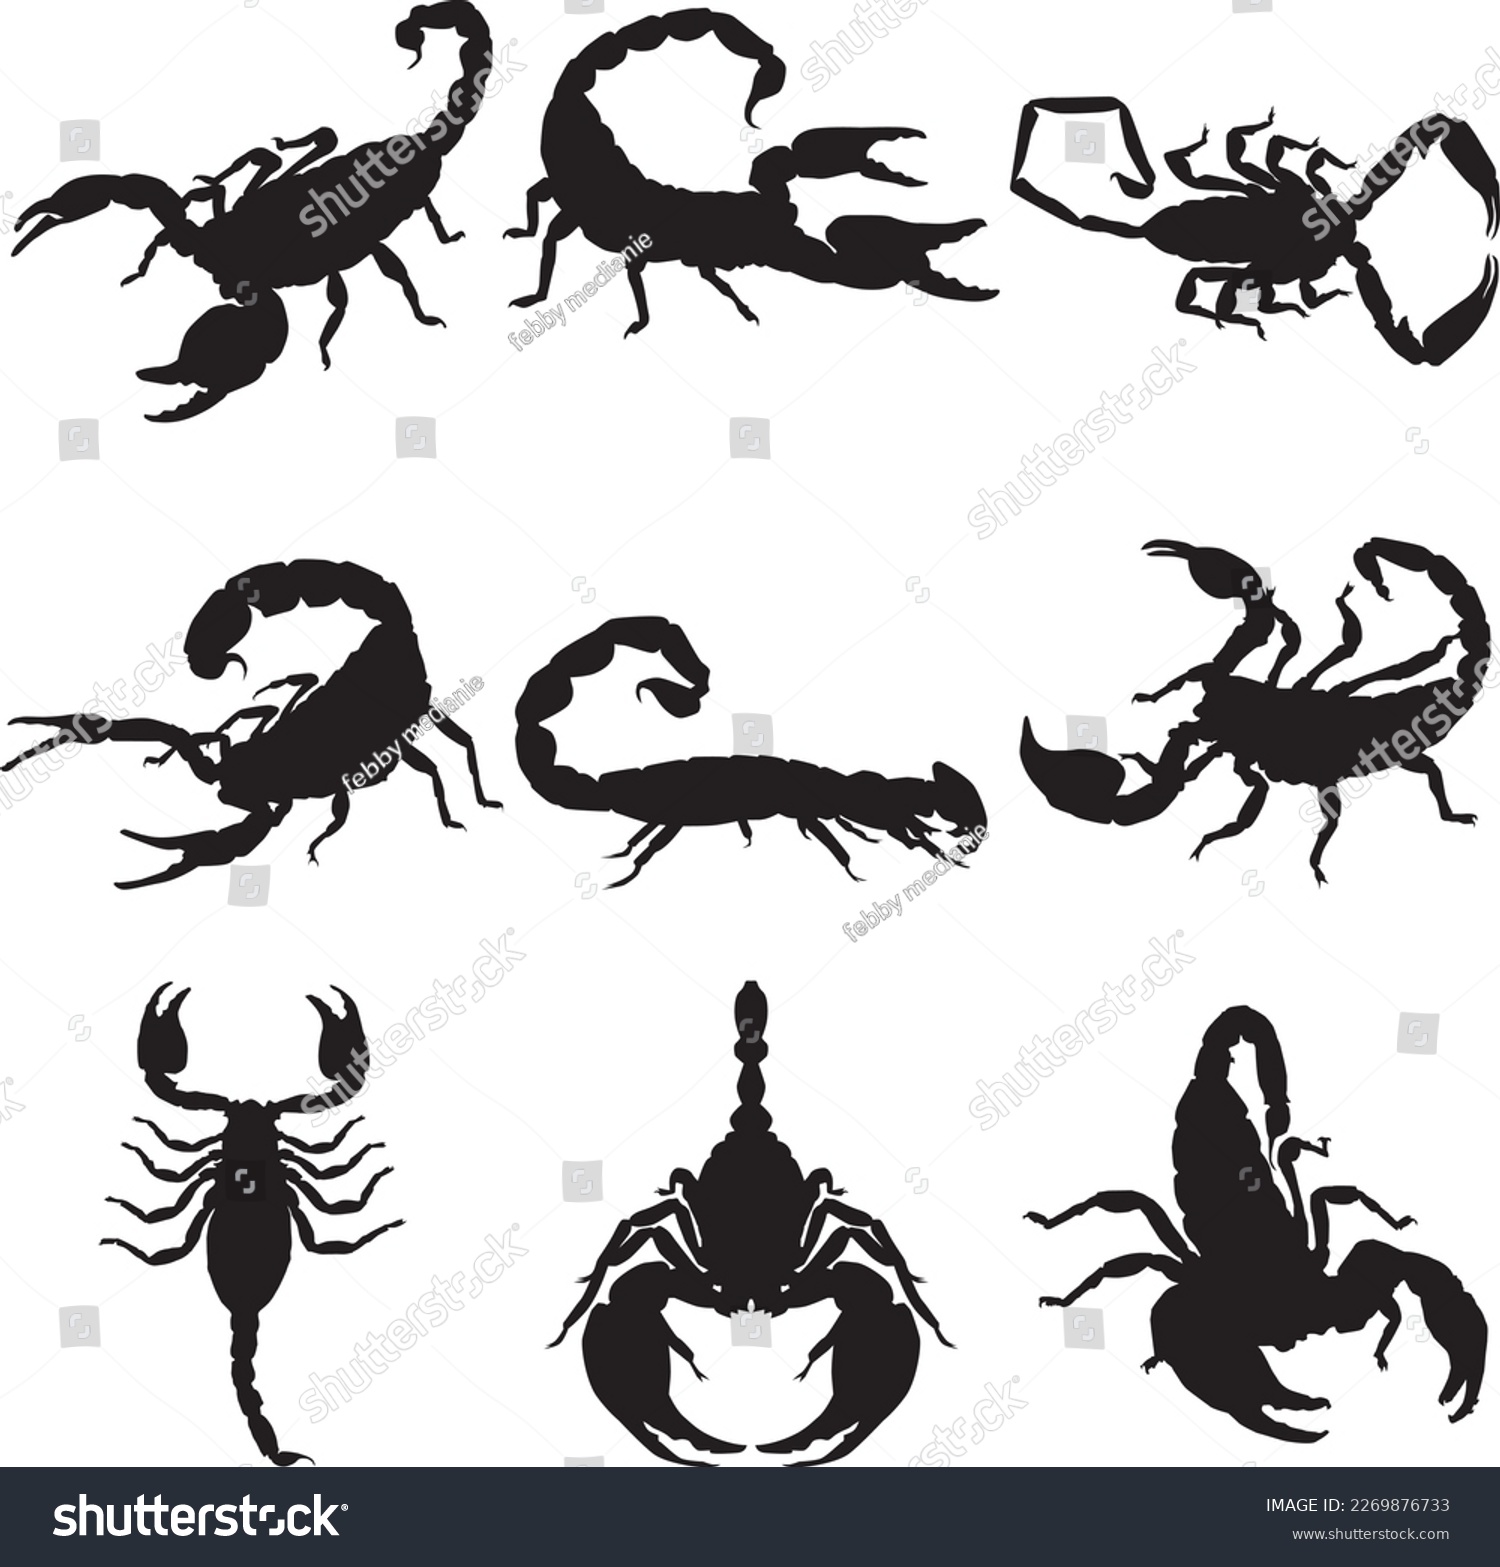 SVG of Black scorpion silhouette isolated on white, Silhouettes of various types of scorpion. svg